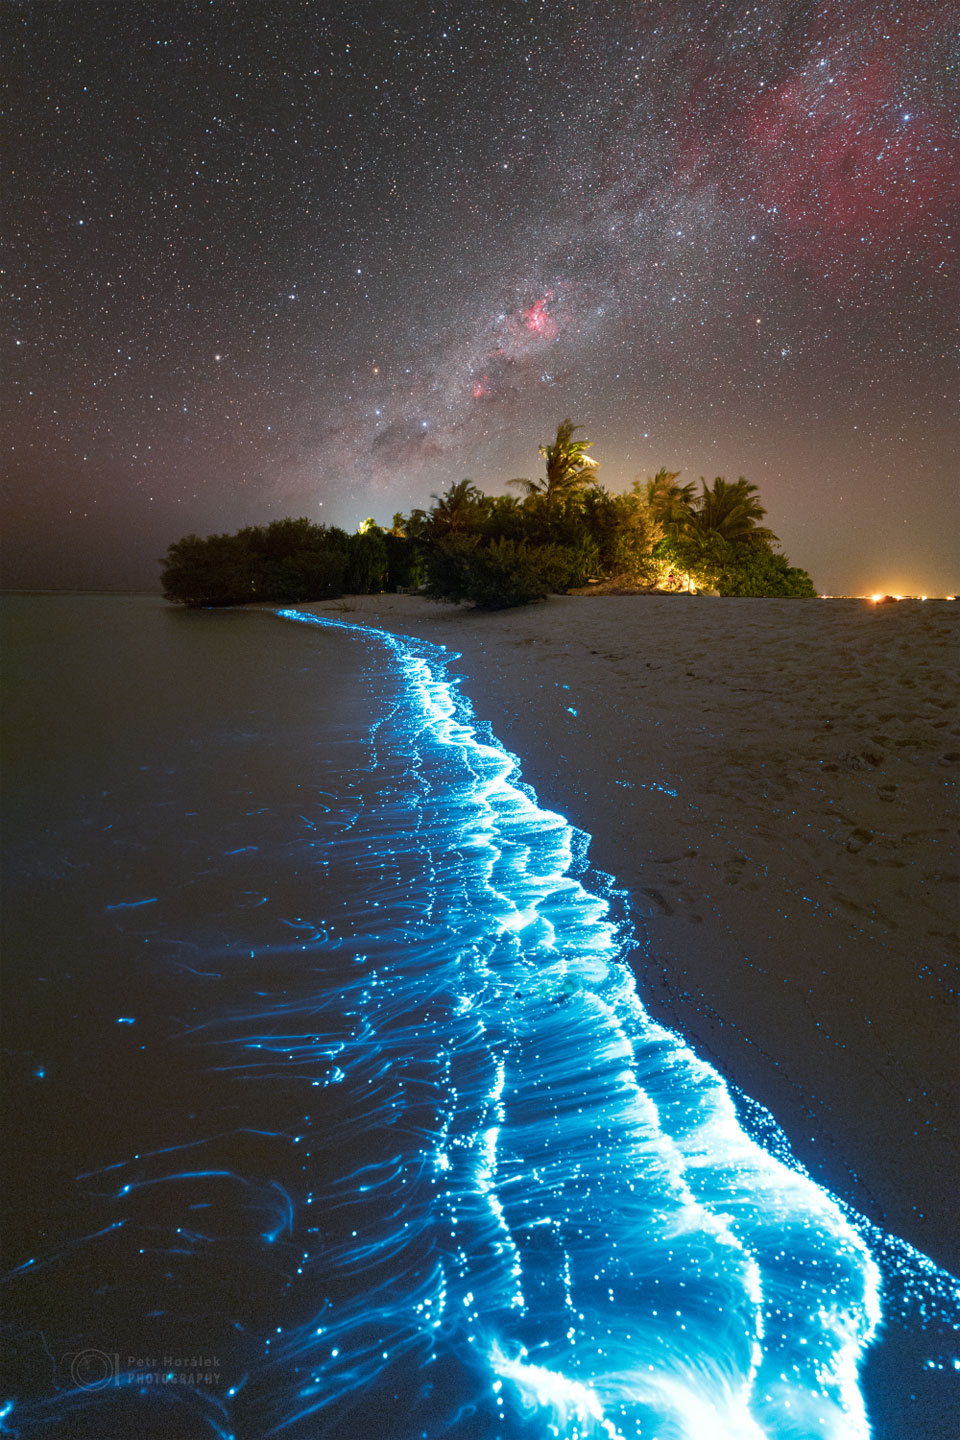 A shoreline glowing with blue bioluminescent plankton is shown,
with a stand of trees in the distance. Above all is a starry sky
which includes red nebulae and the central band of our Milky
Way Galaxy.
Please see the explanation for more detailed information.